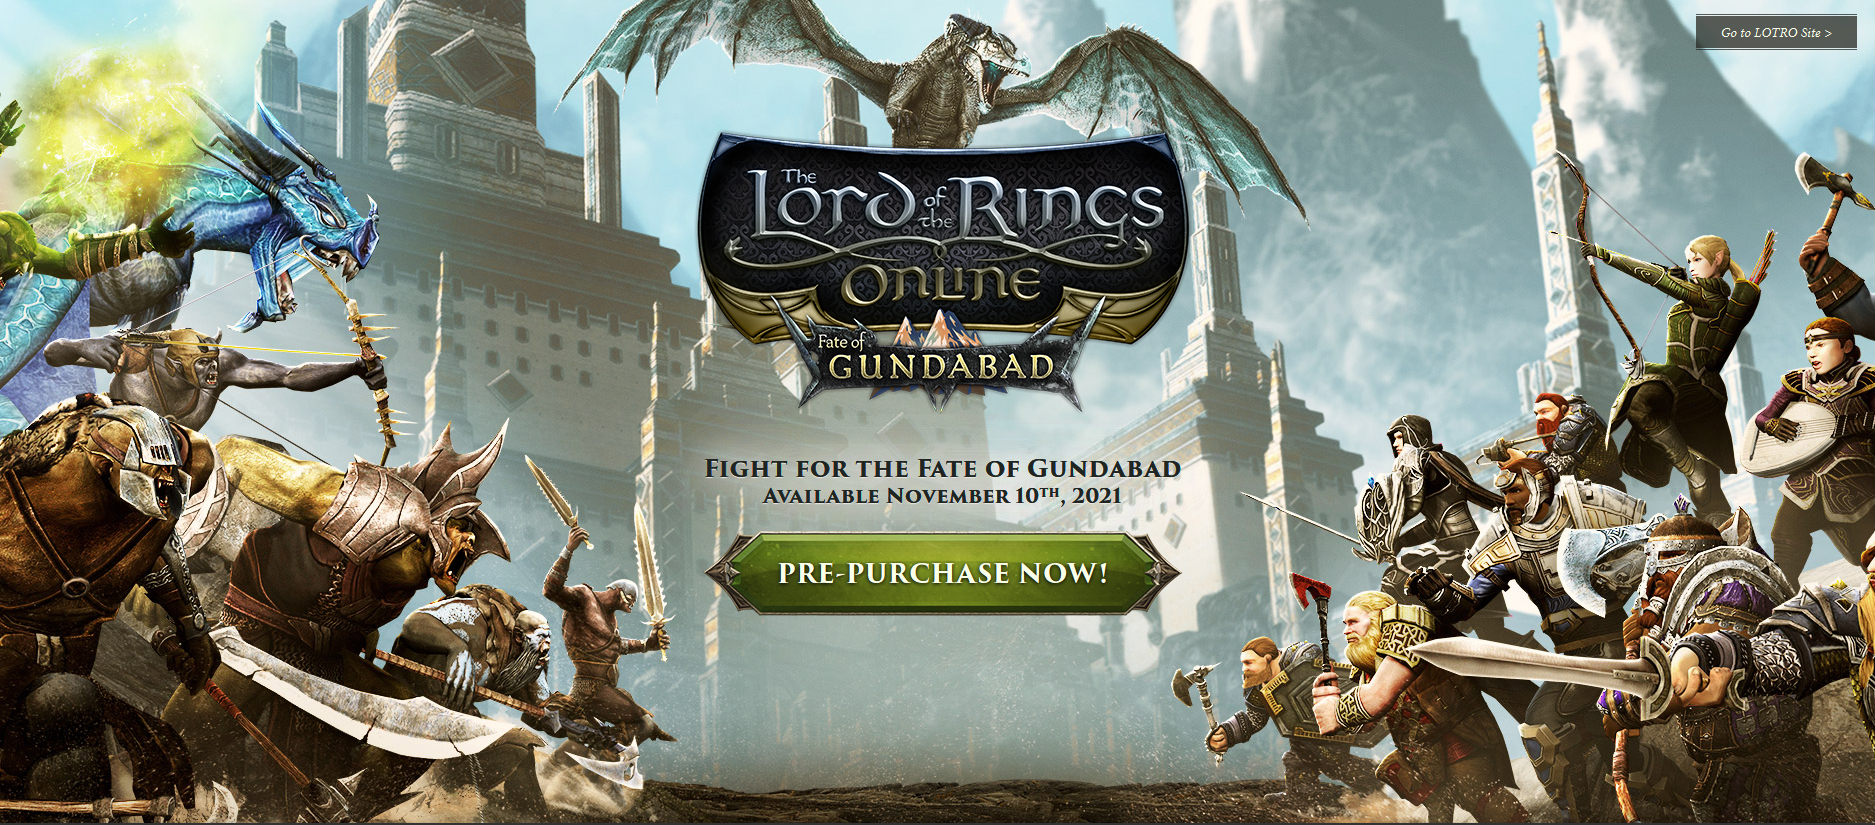 LOTRO’s Fate of Gundabad is Available for Pre-Purchase